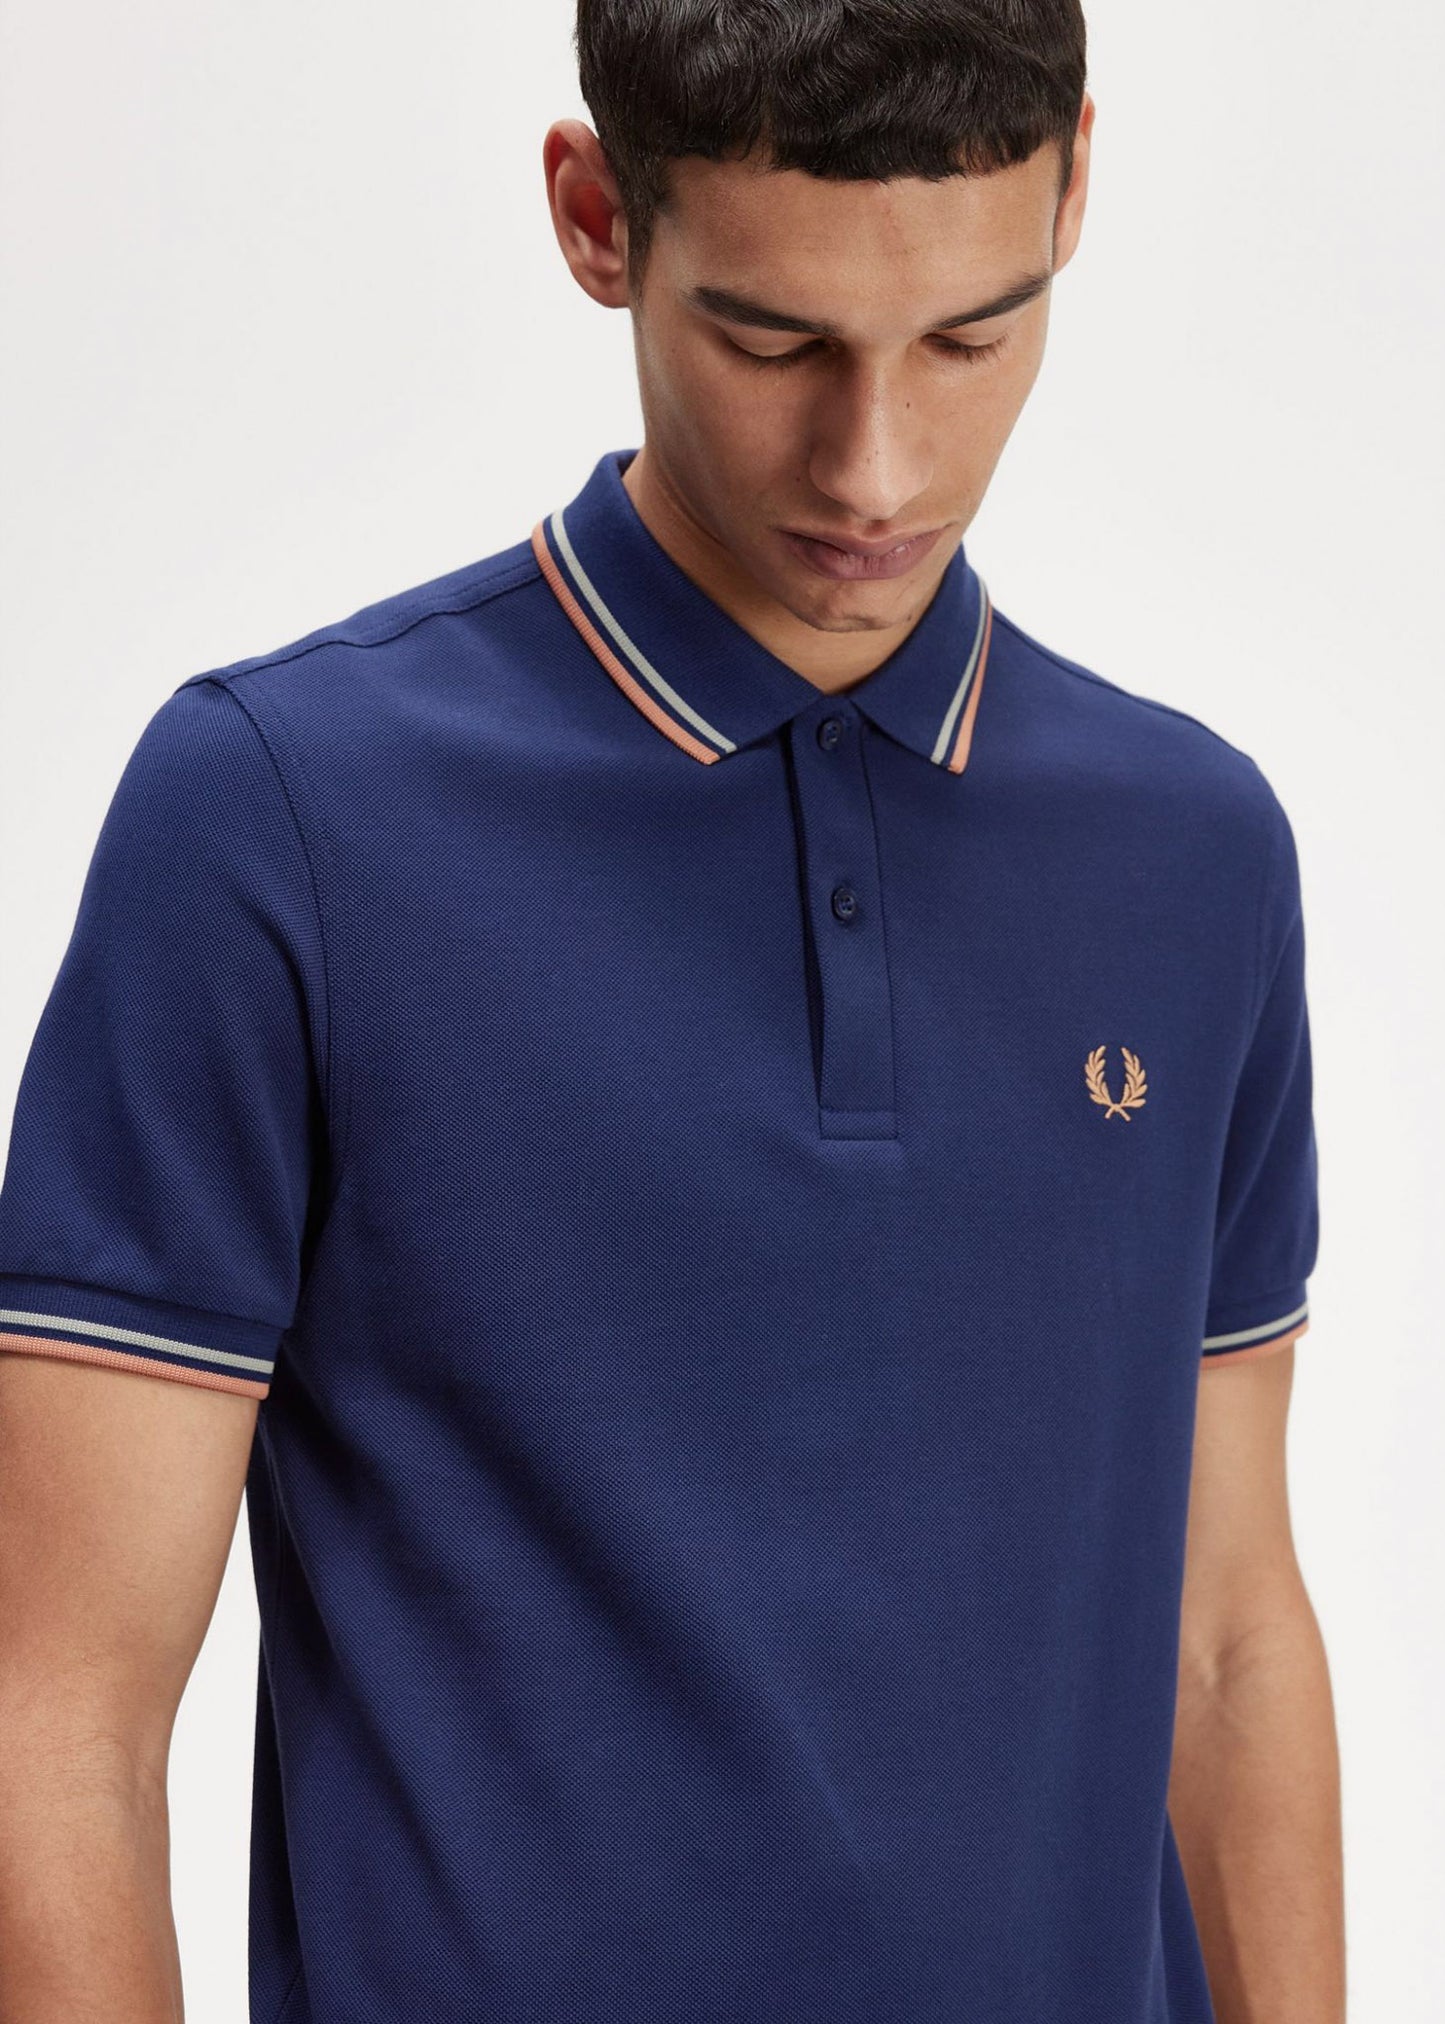 Twin tipped fred perry shirt - french navy seagrass light rust